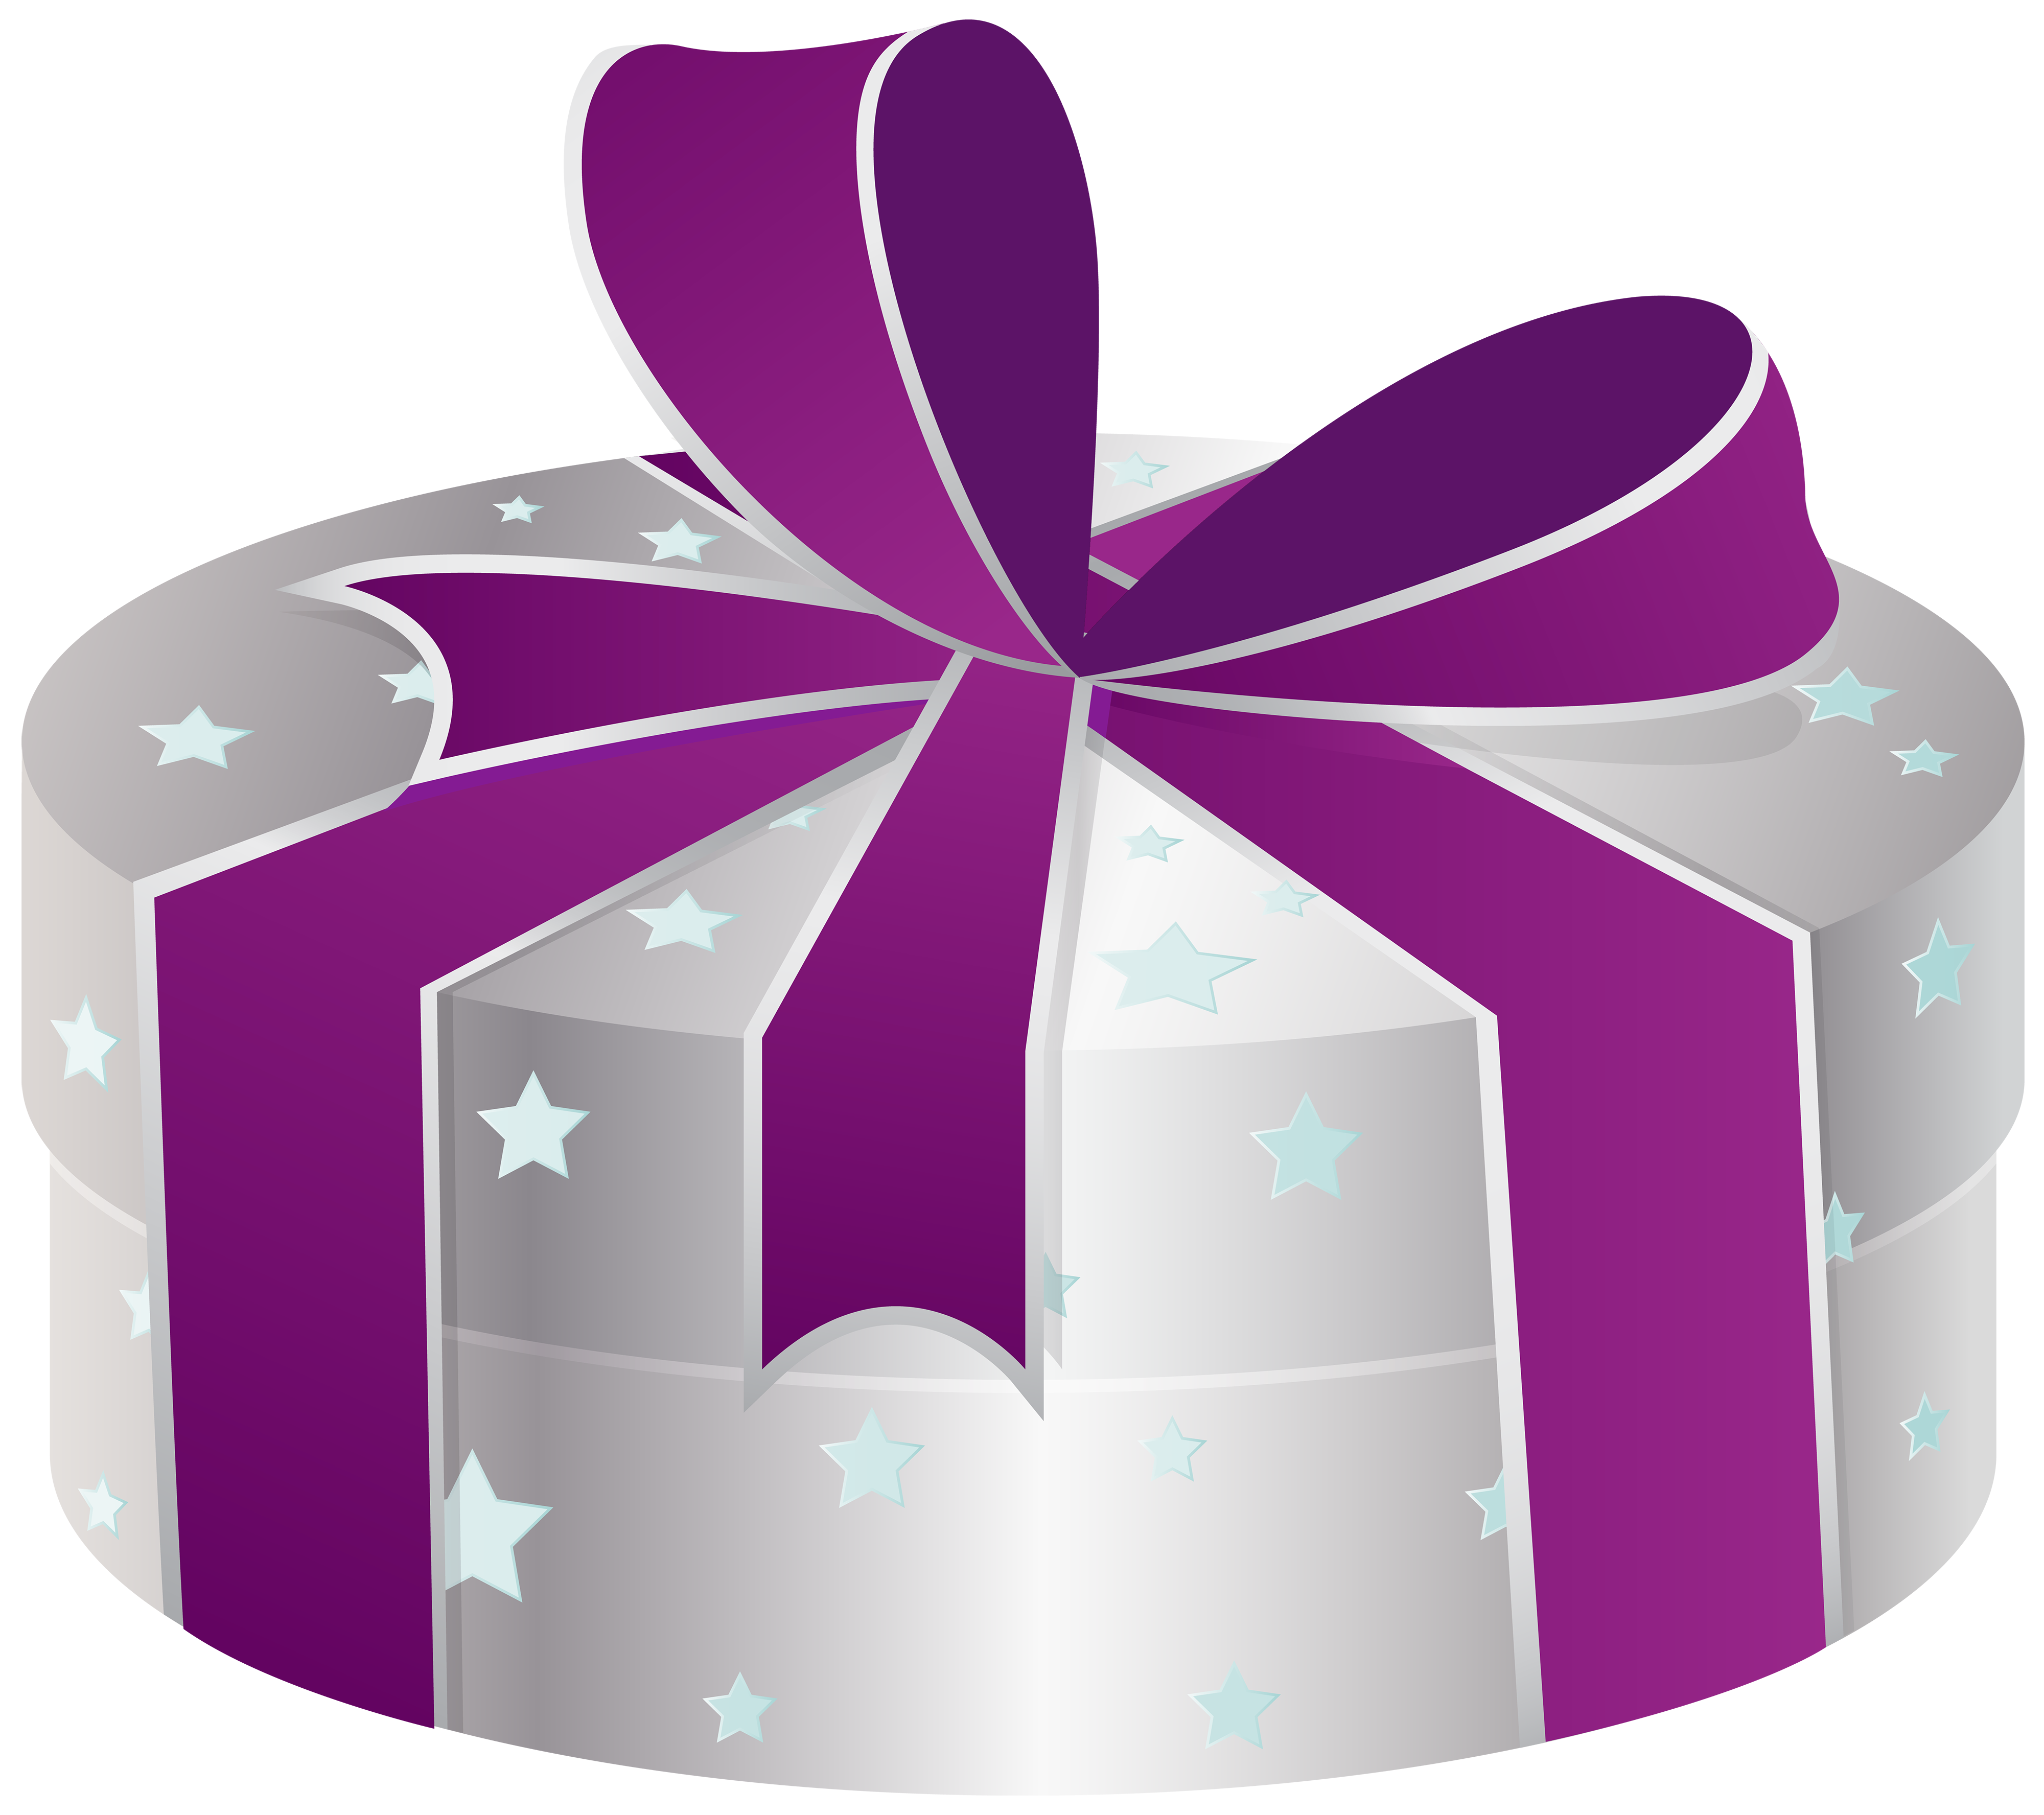 Silver with stars png. Gift clipart hat box